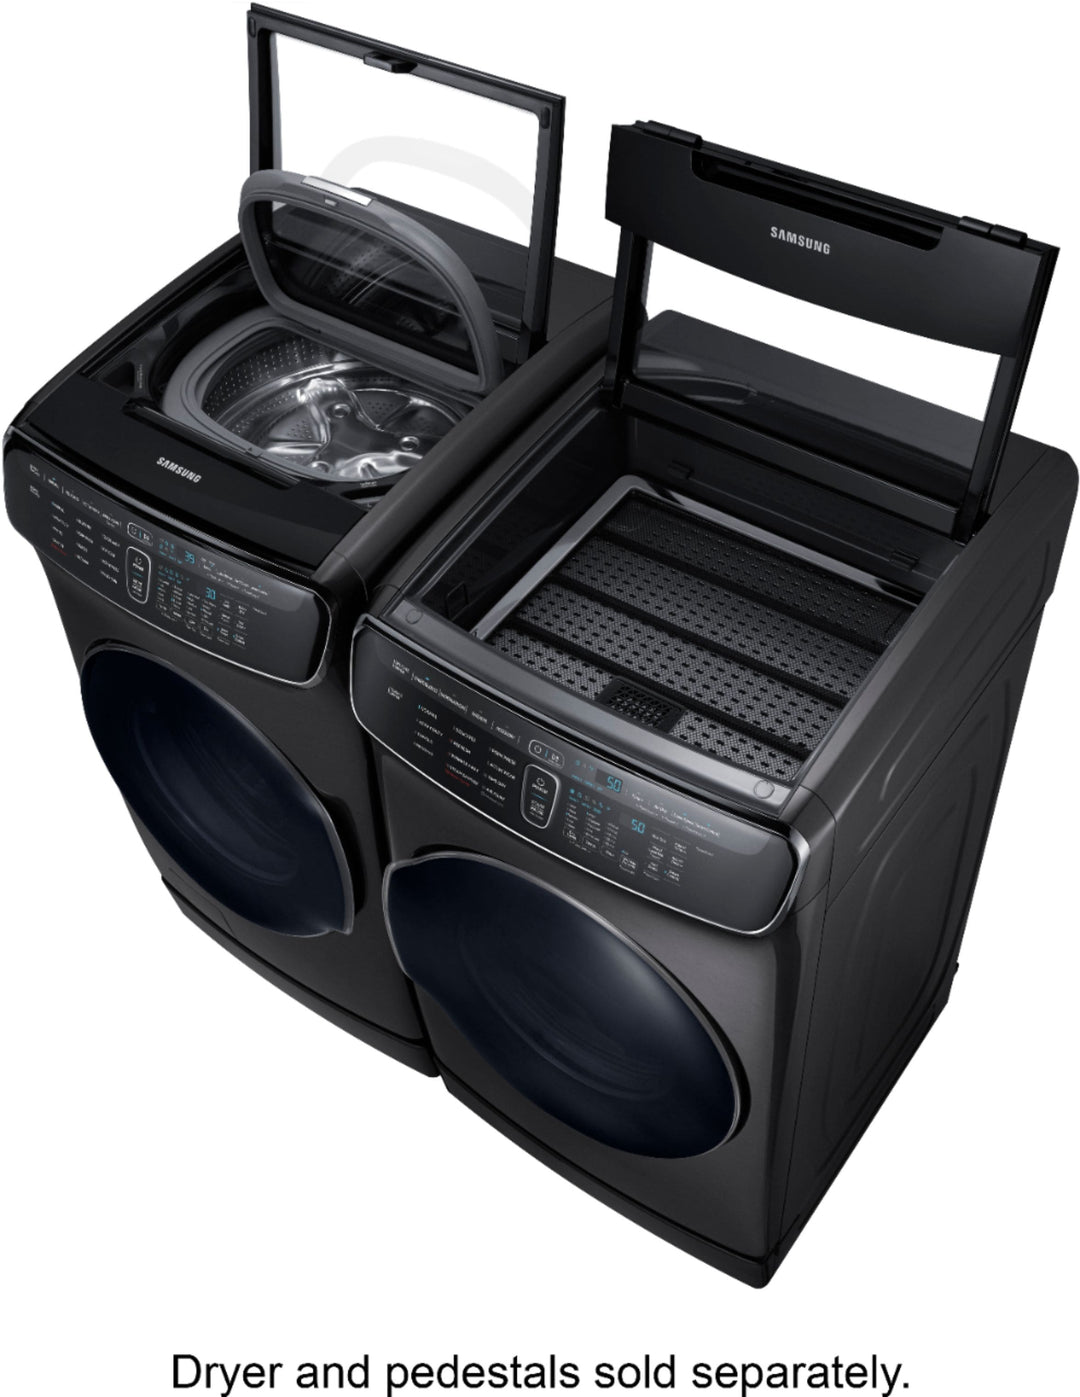 Samsung - 6.0 Cu. Ft. High Efficiency Smart Front Load Washer with Steam and FlexWash - Black stainless steel_4